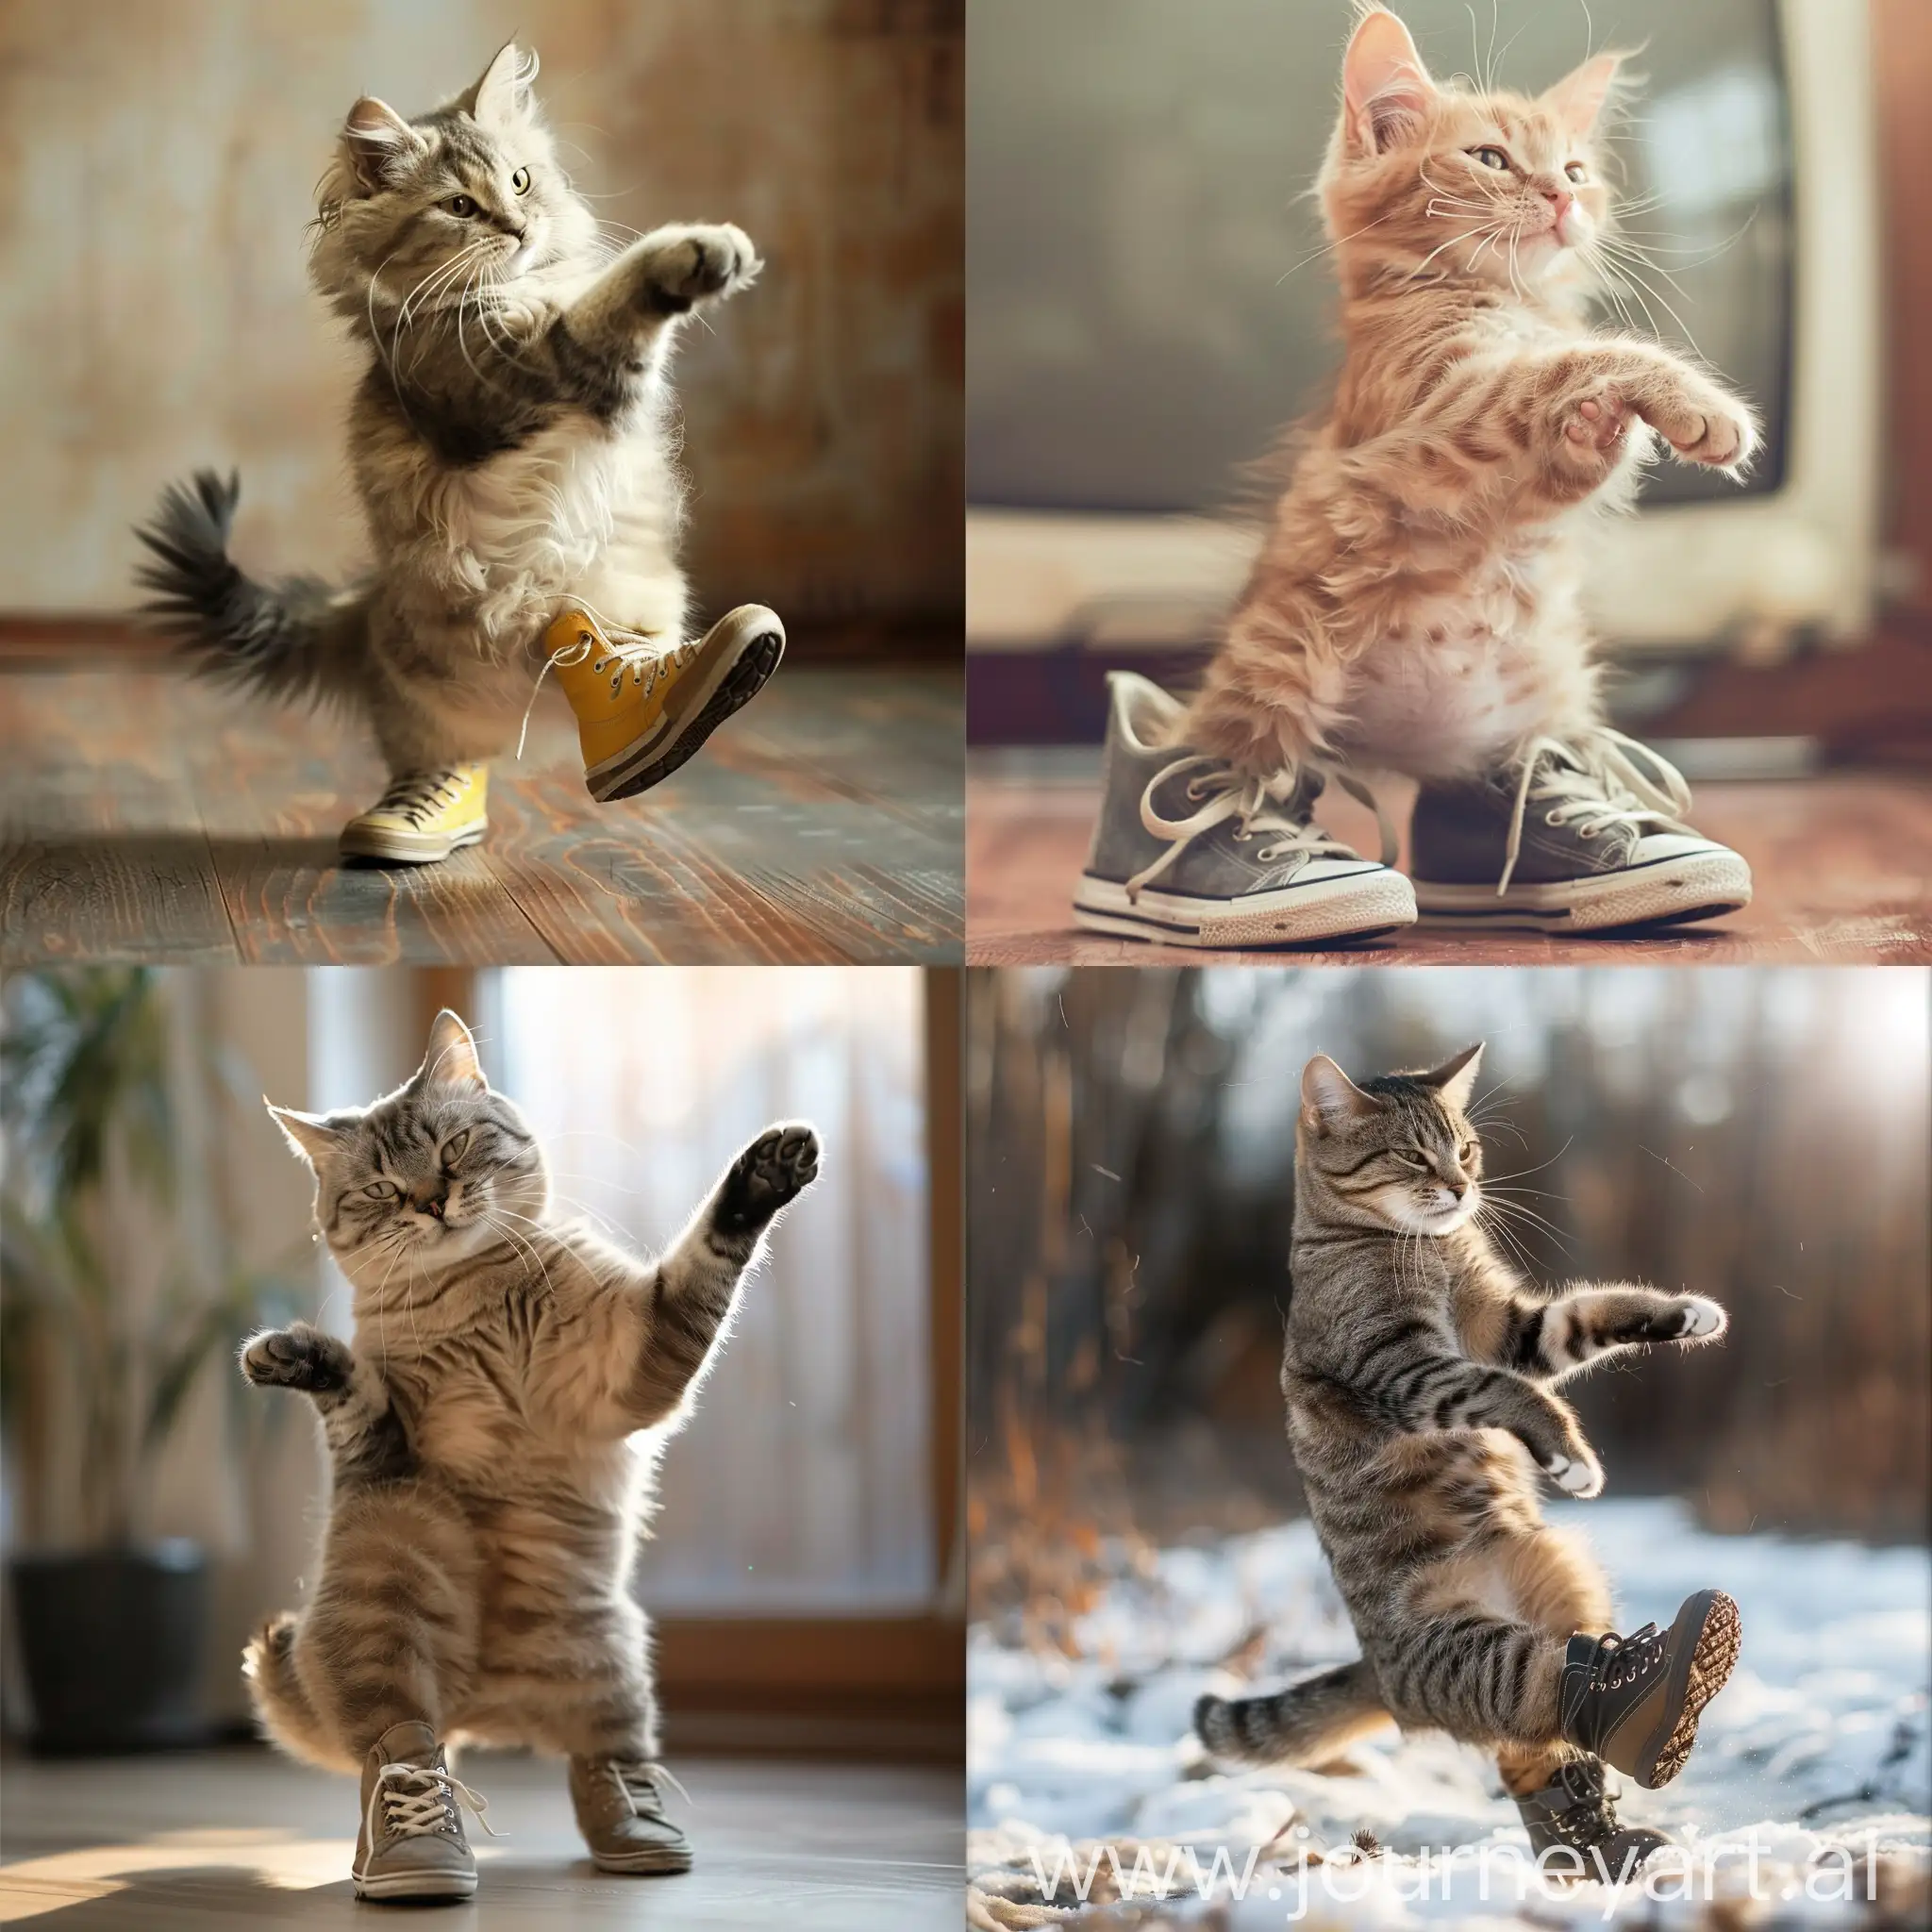 Adorable-Cat-Dancing-in-Colorful-Shoes